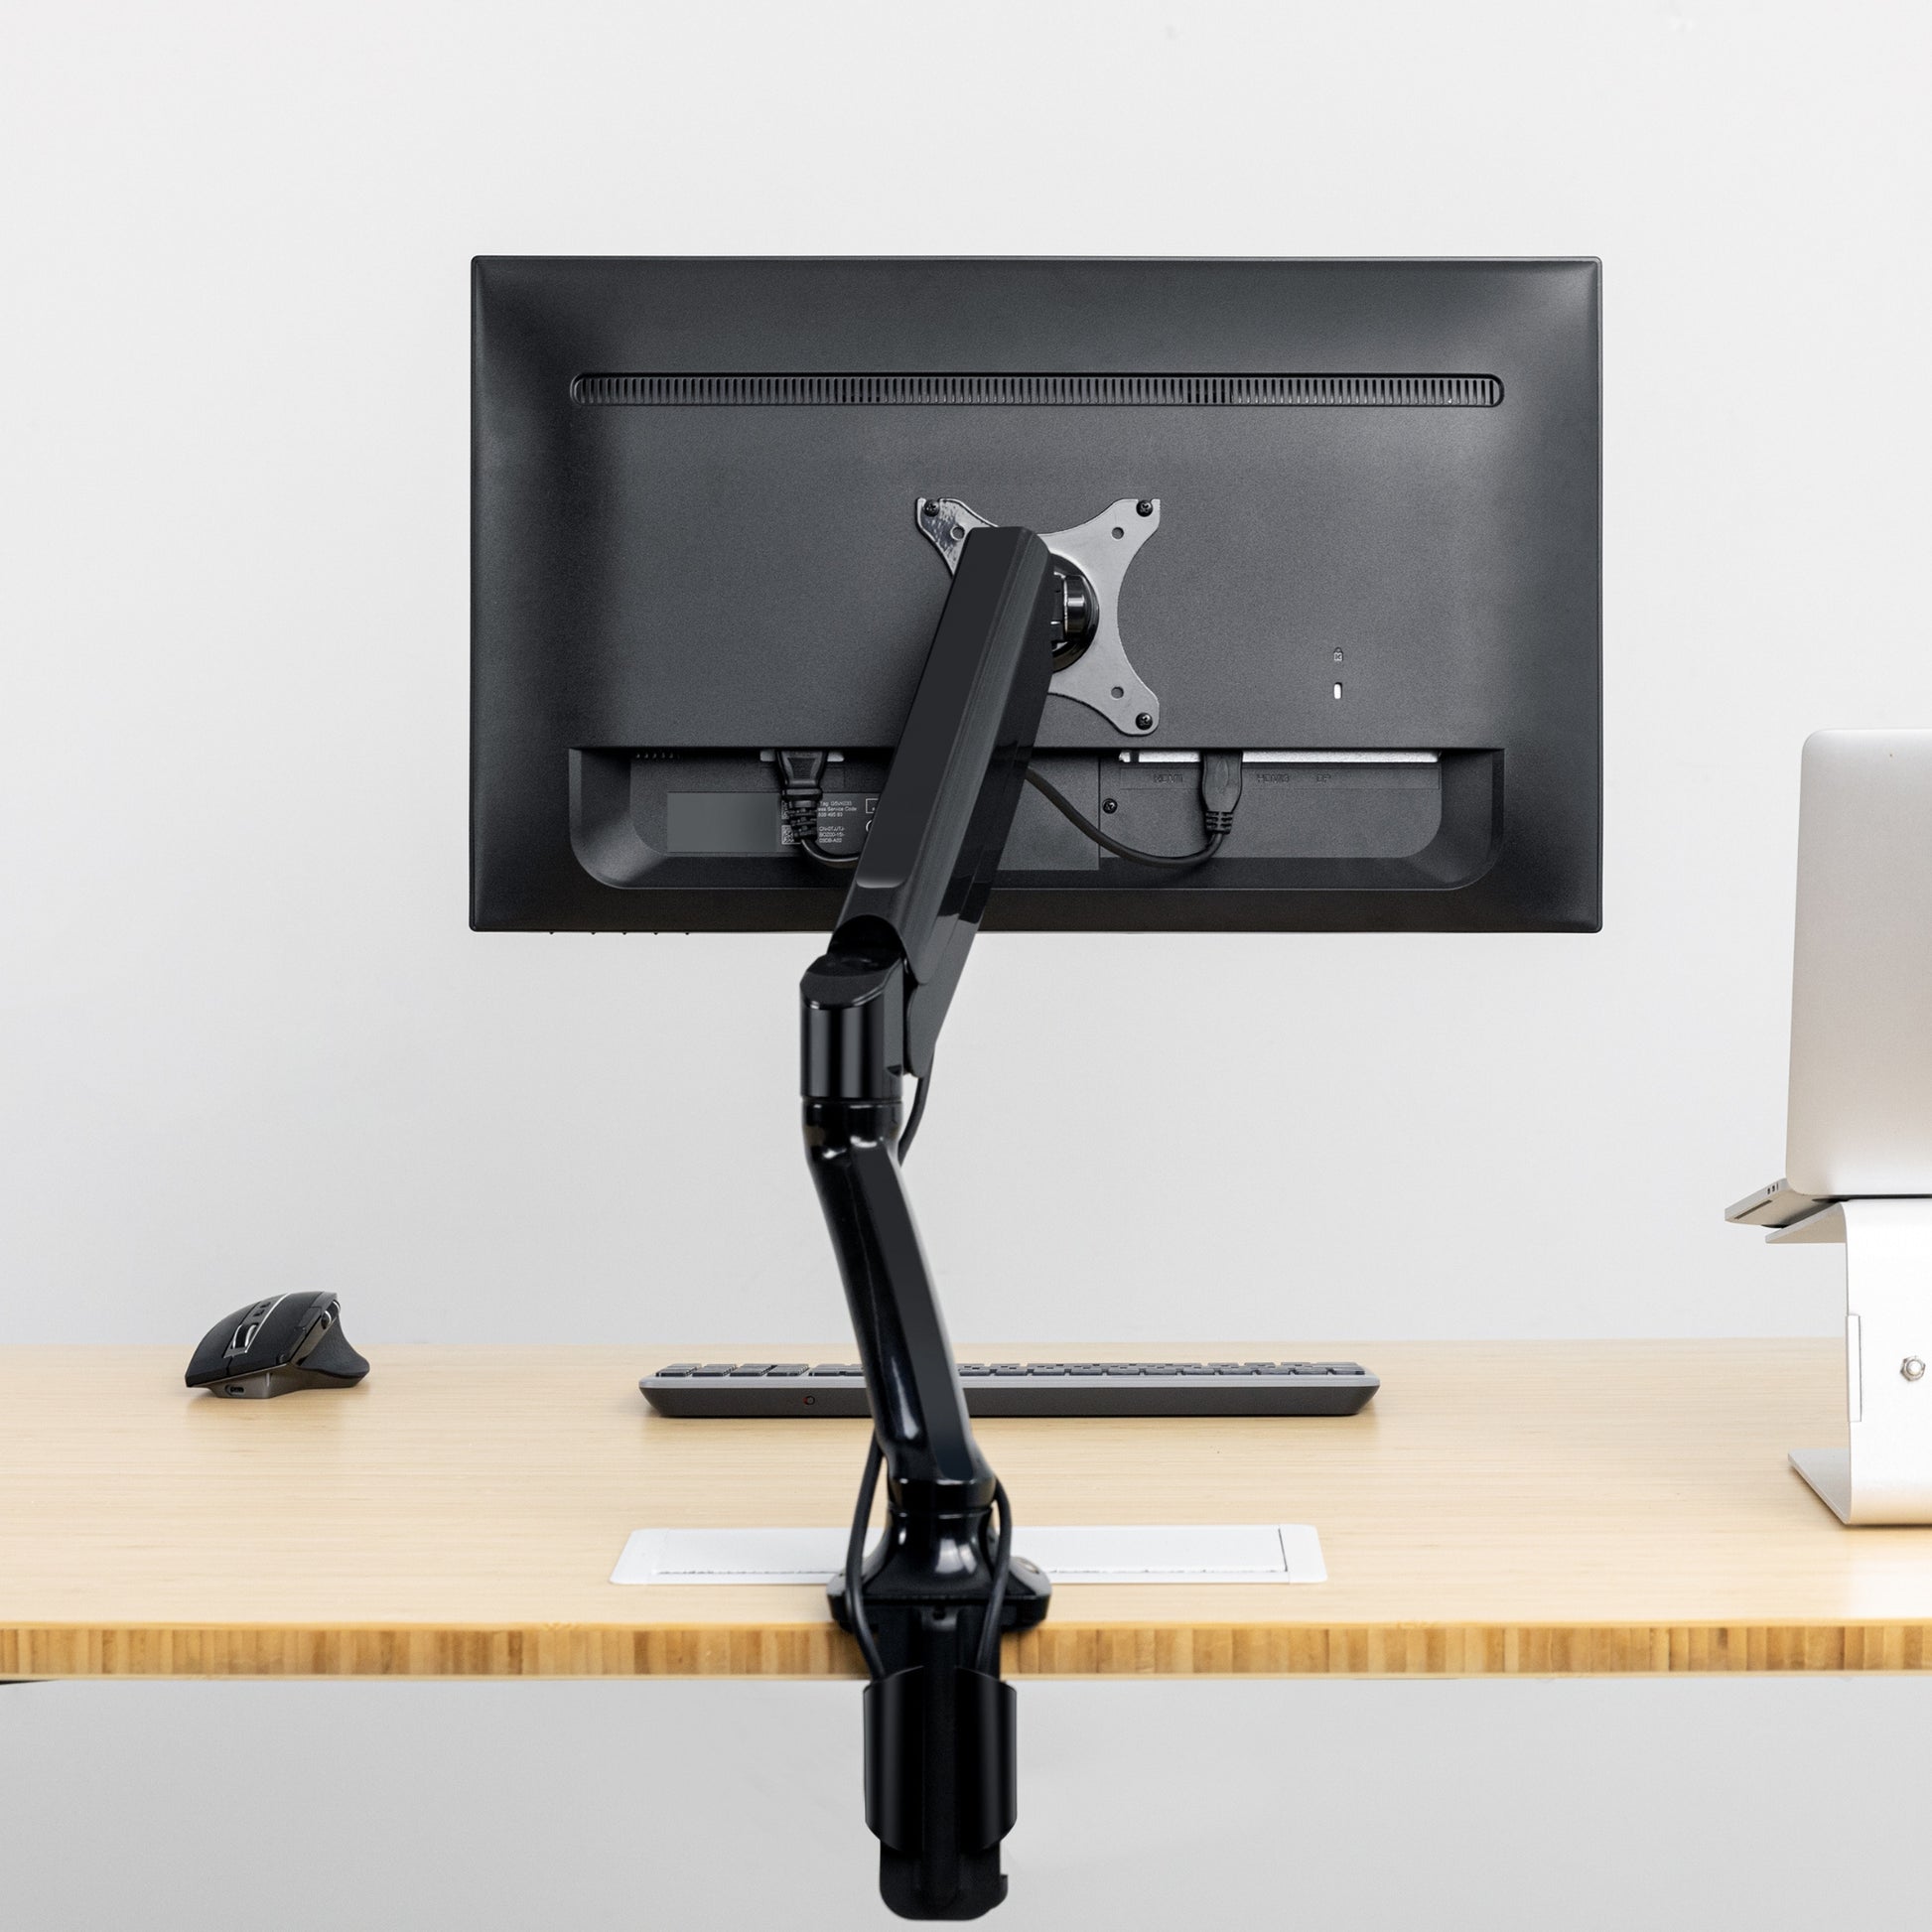 VIVO Single Monitor Height Adjustable Counterbalance Pneumatic Arm Desk  Mount Stand, Classic, Universal VESA Fits Screens up to 32 inches,  STAND-V001O